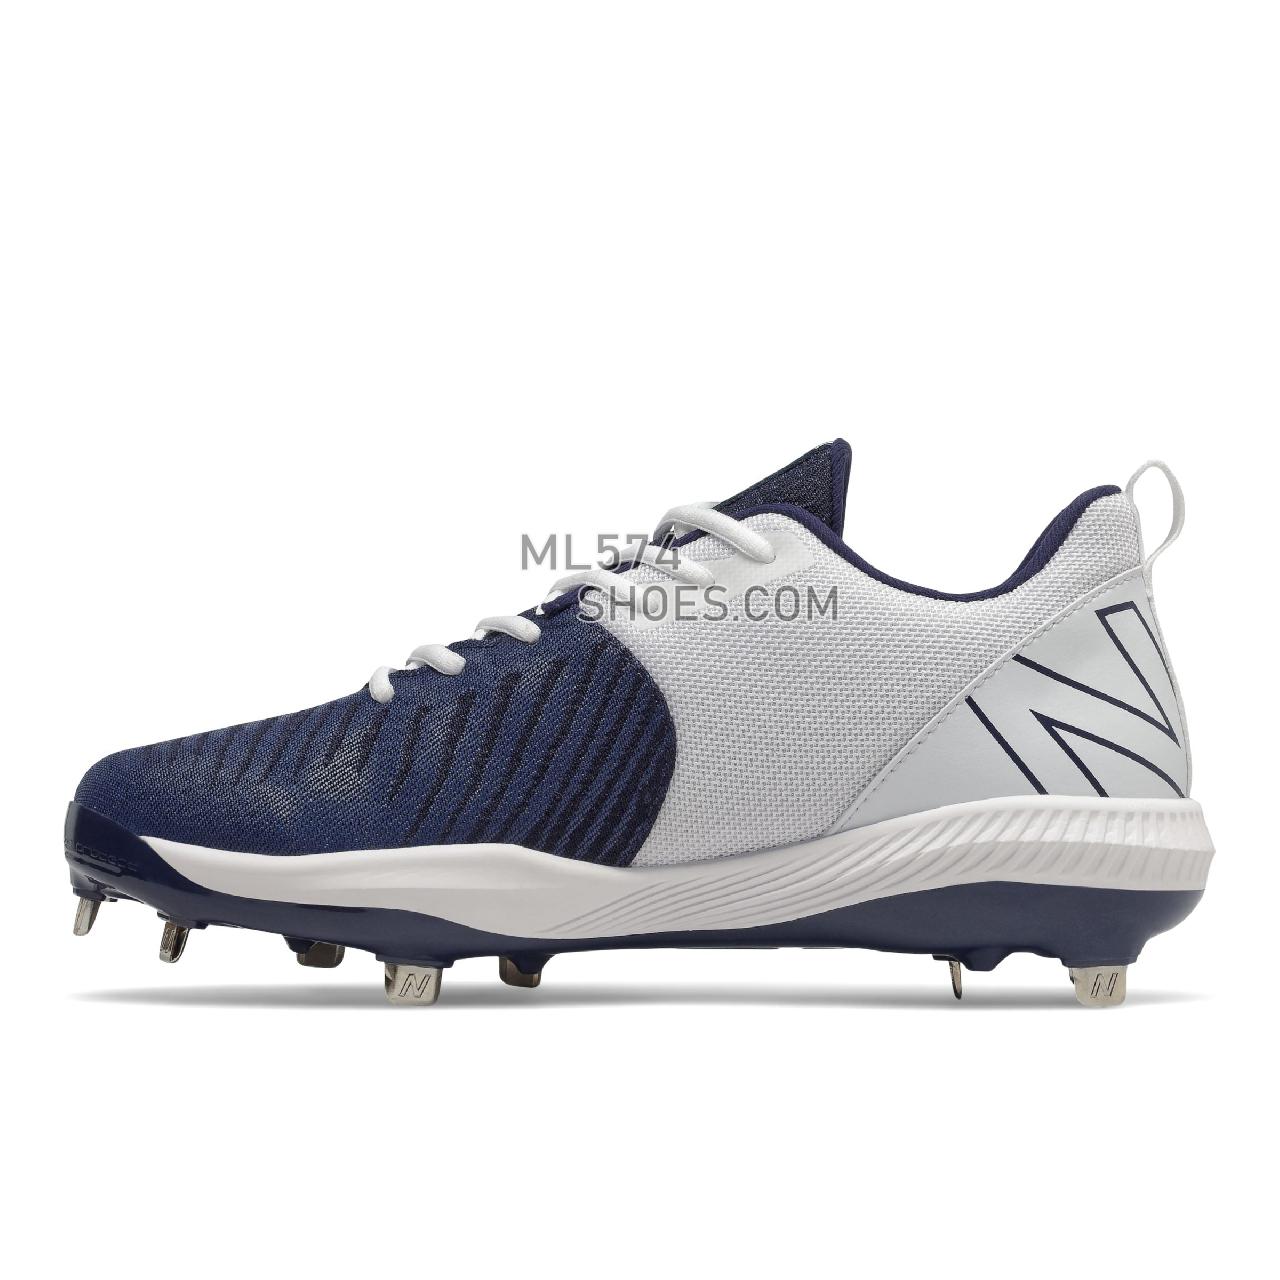 New Balance FuelCell 4040 v6 Metal - Men's Mid-Cut Baseball Cleats - Team Navy with White - L4040TN6